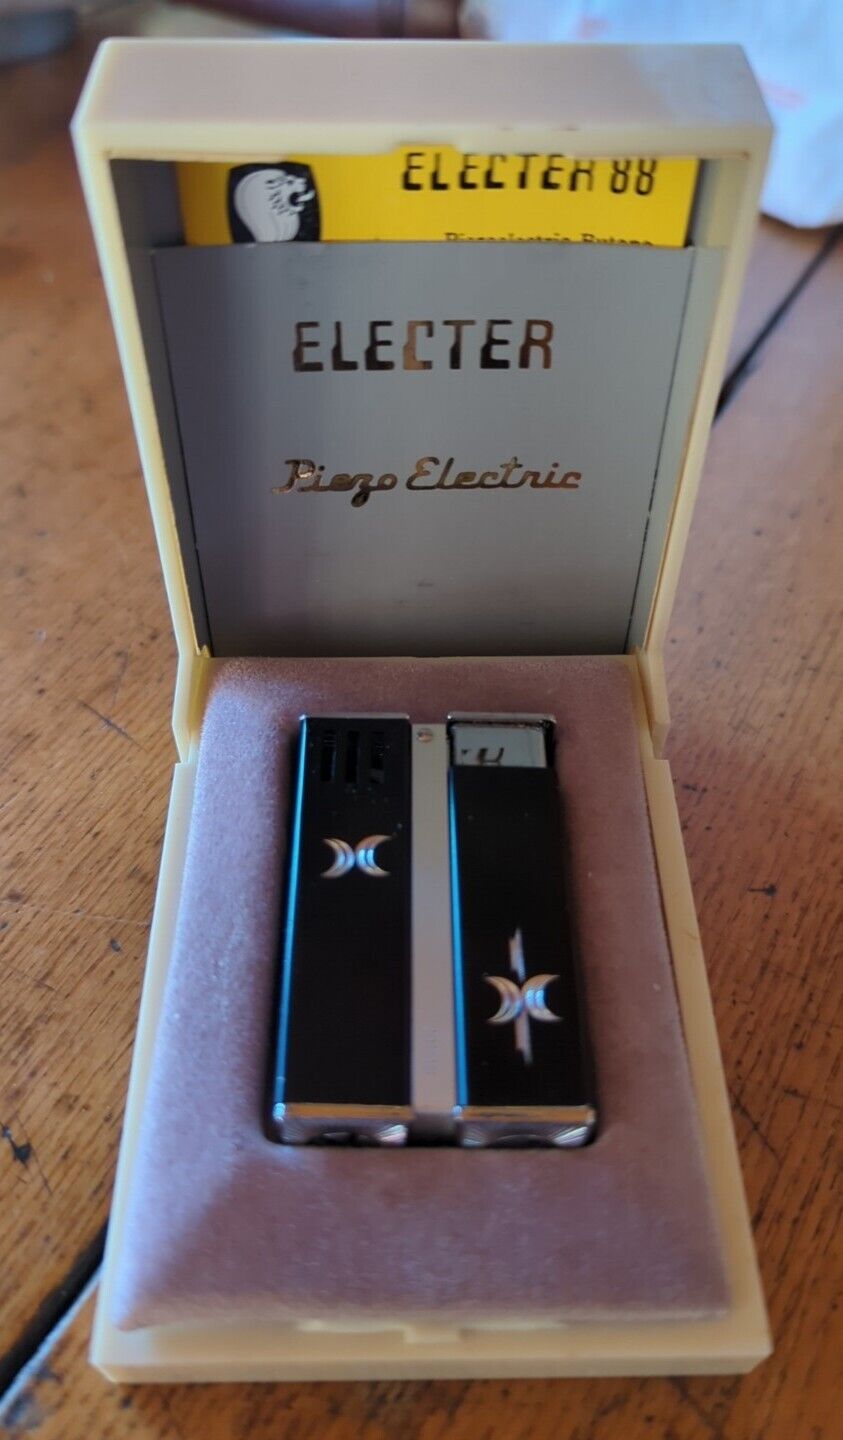 Vintage Beautiful Electer 88 Piezo Electric Lighter Made In Japan 